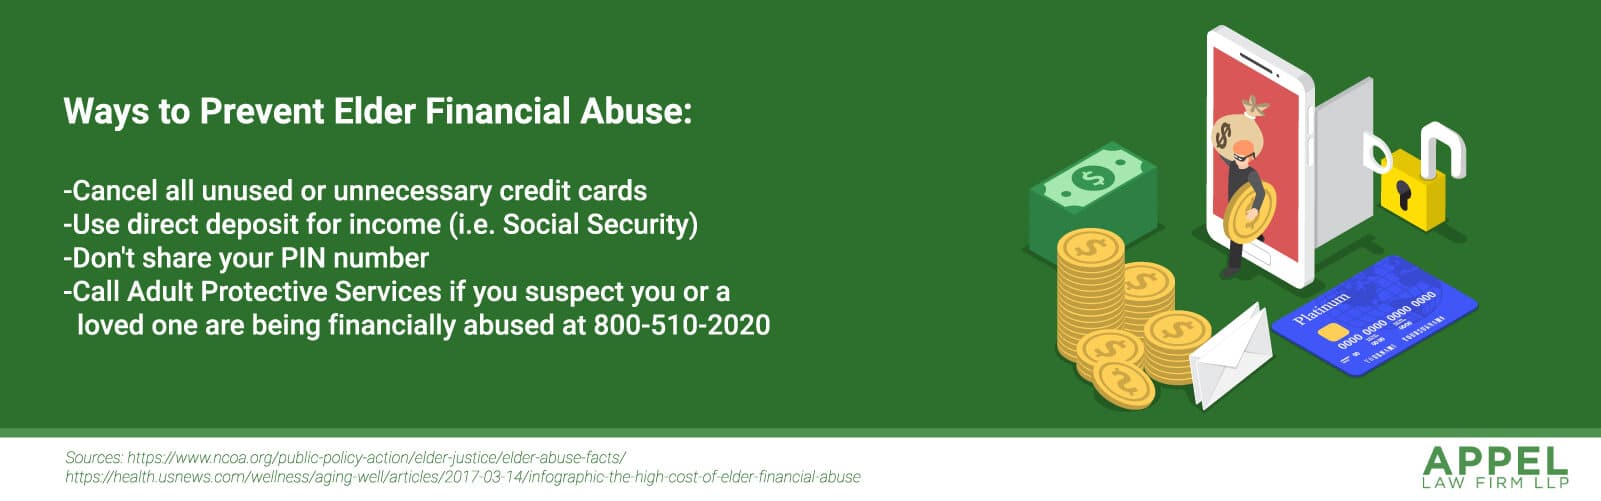 prevent-financial-abuse